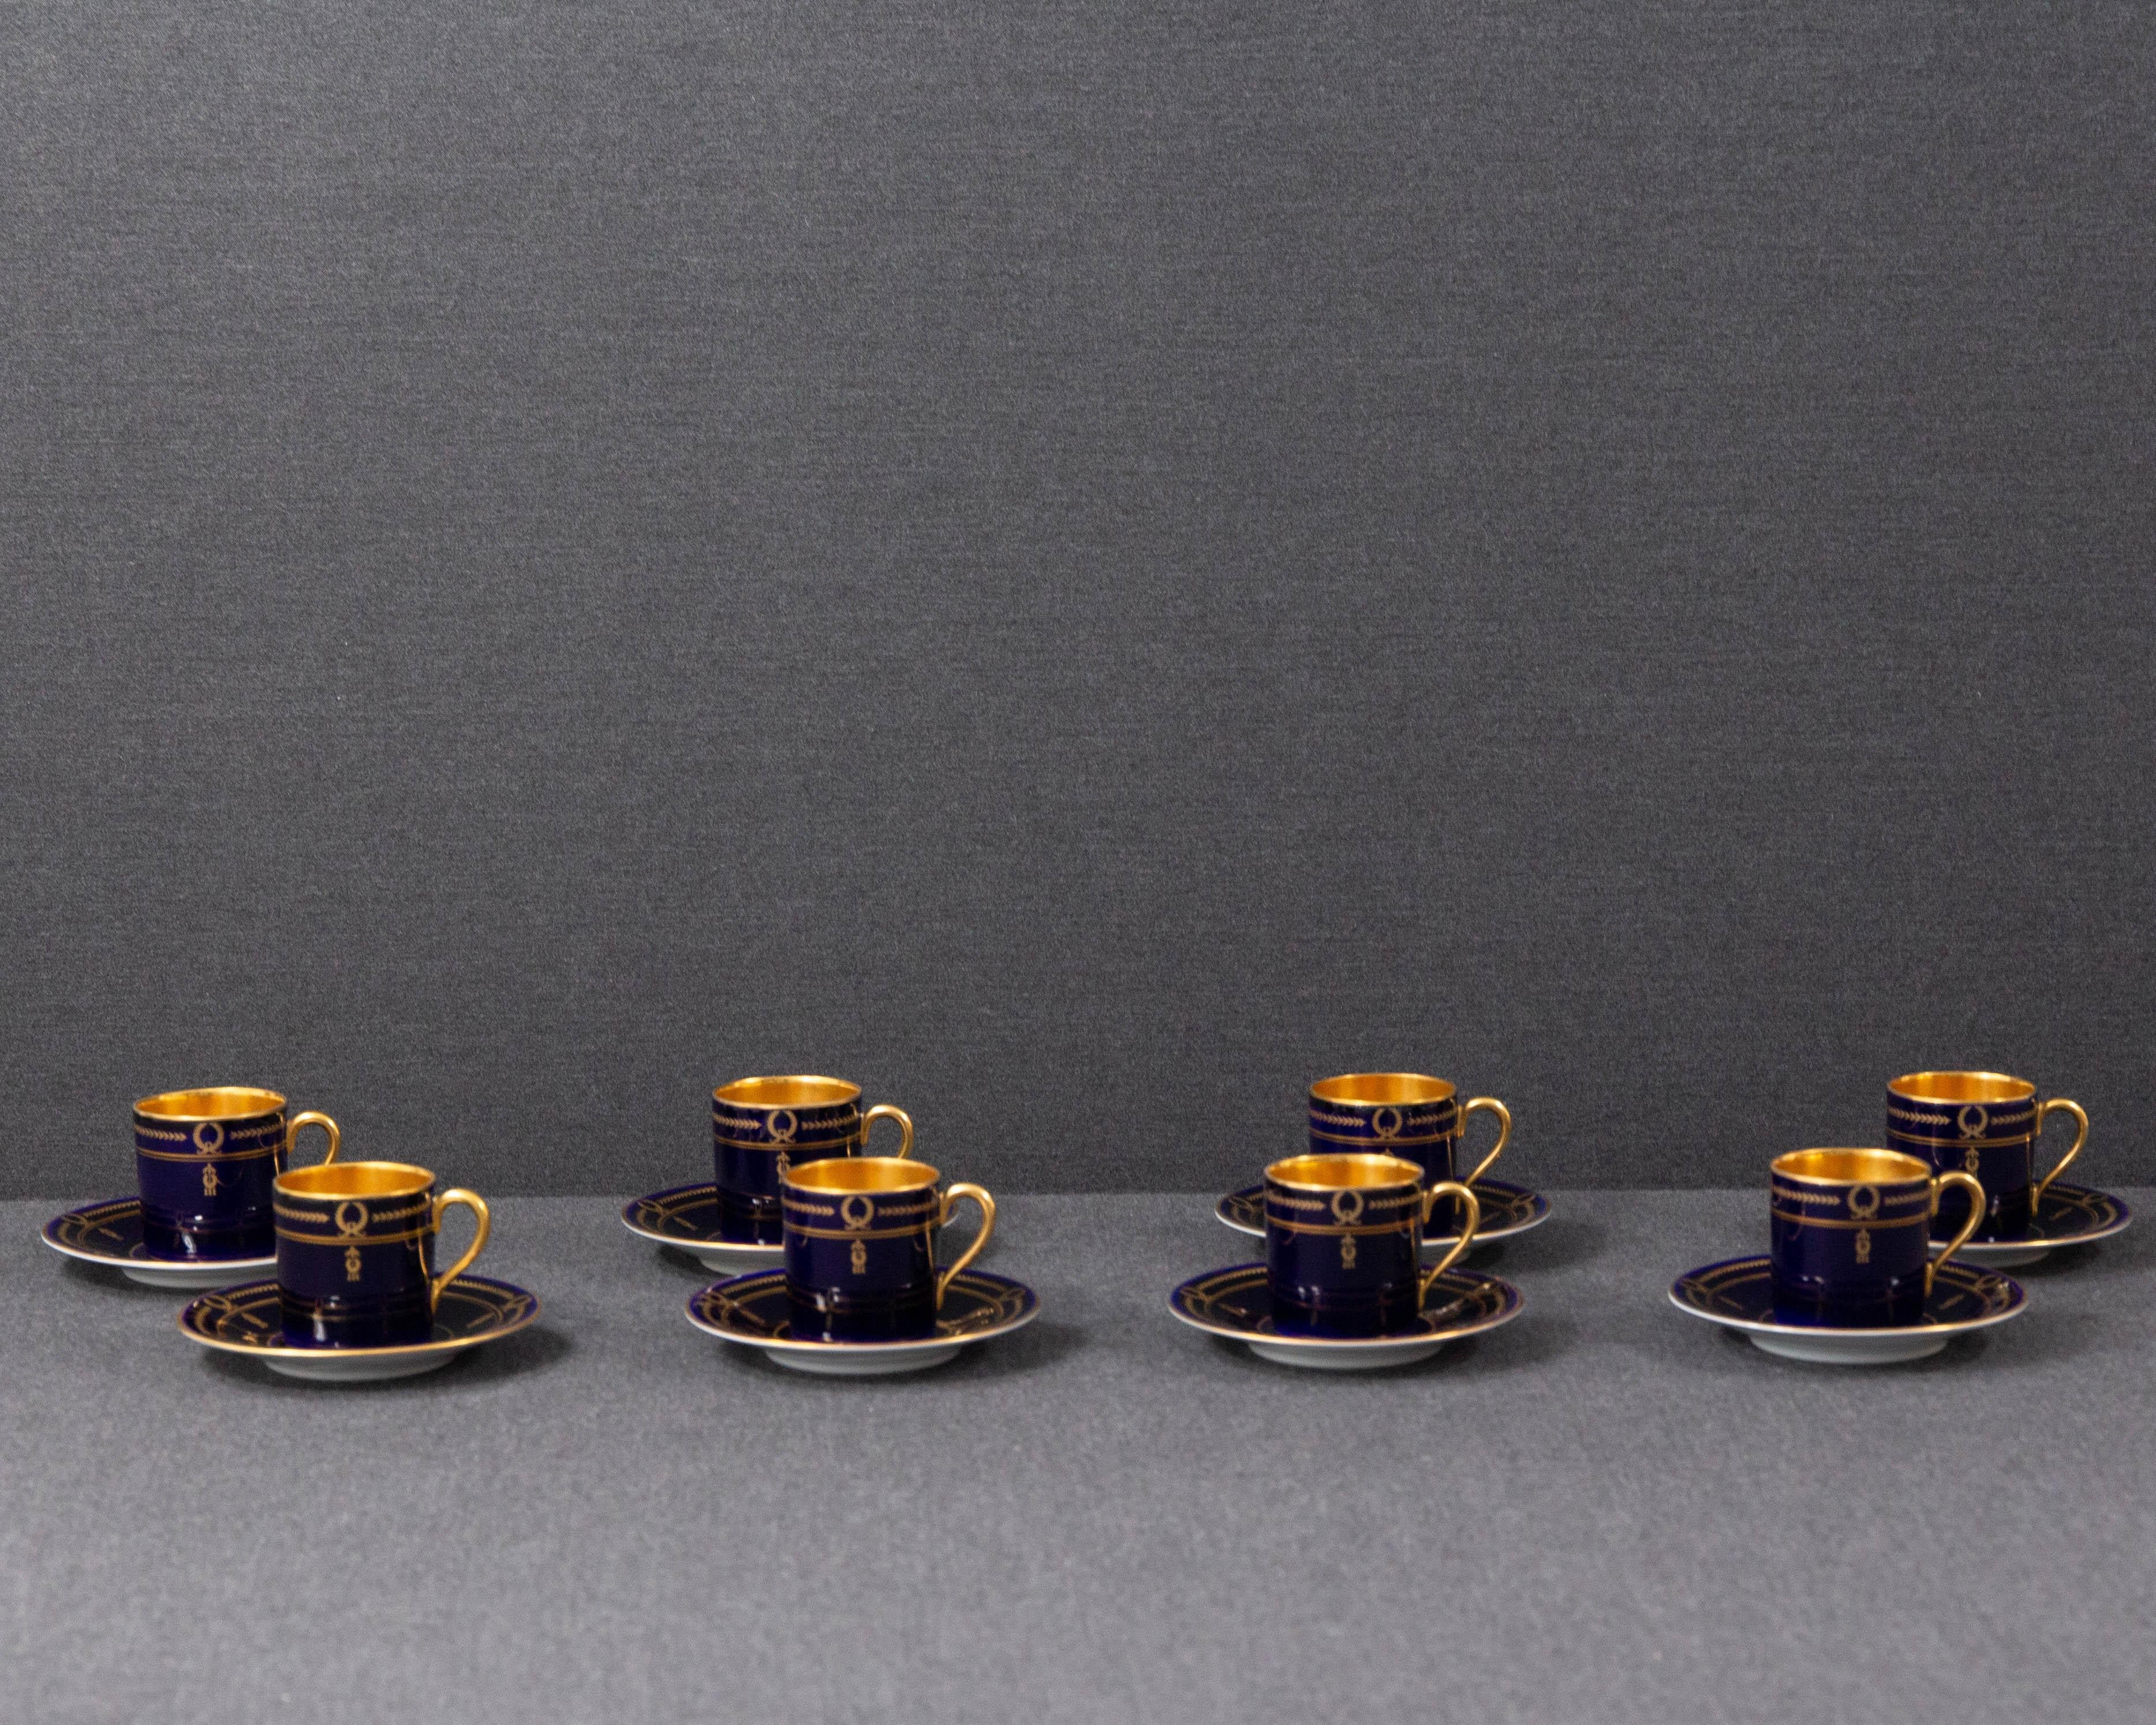 A set of eight Rosenthal D1245 pattern demitasse cups.

The set was made by Rosenthal in the 1950s. It was decorated with beautiful deep cobalt blue and ample gilding. The set was sold at and marked with the logo of the luxury dinnerware retailer